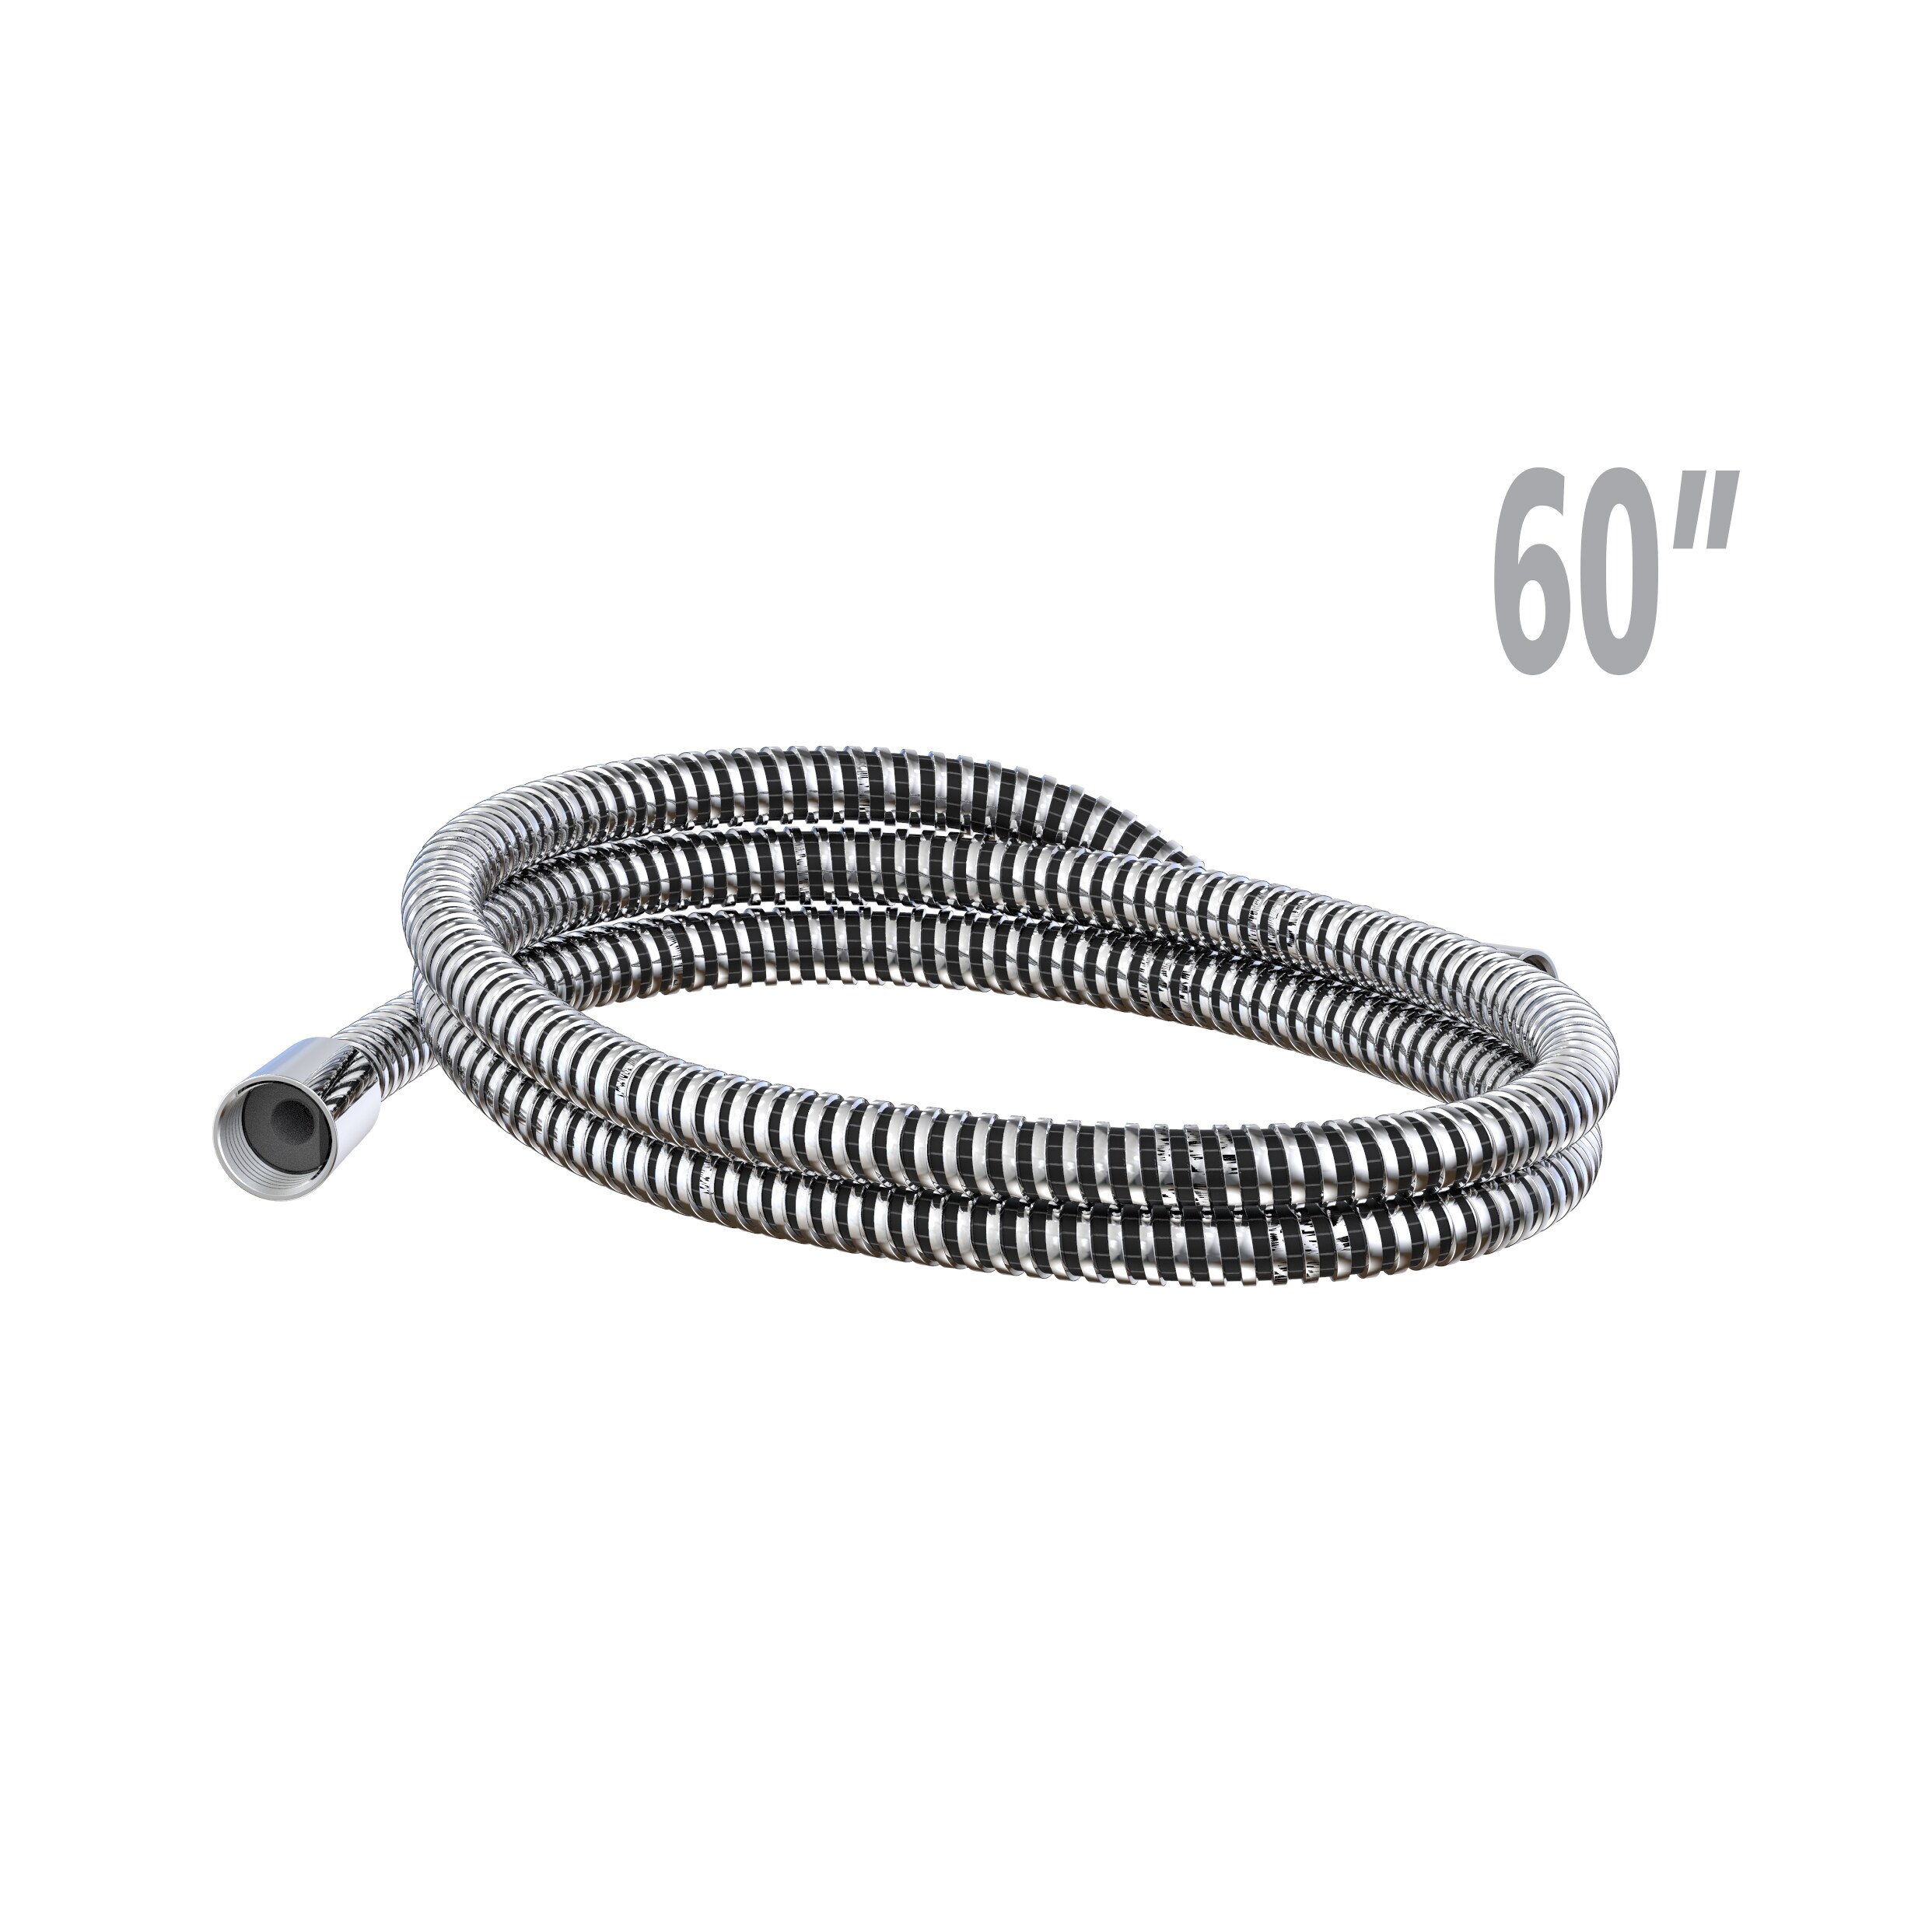 Graff G-8605-pc 59 Inch Shower Hose in Polished Chrome for sale online 